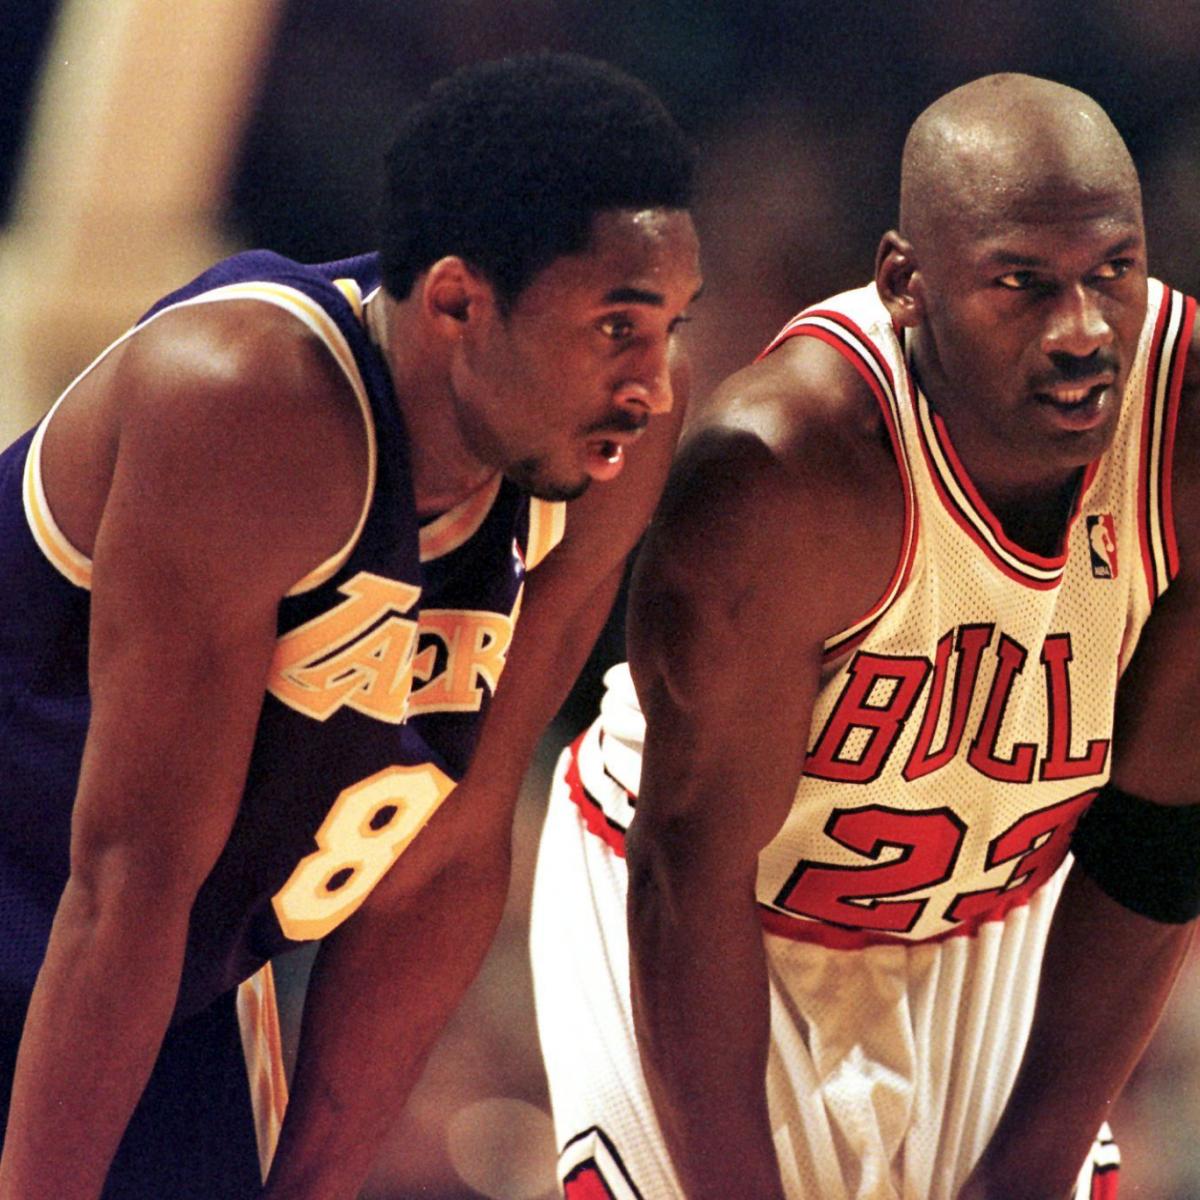 ESPN Ranks The Top 10 Best Players Of All-Time: Michael Jordan 1st, LeBron  James 2nd, Kobe Bryant 9th - Fadeaway World